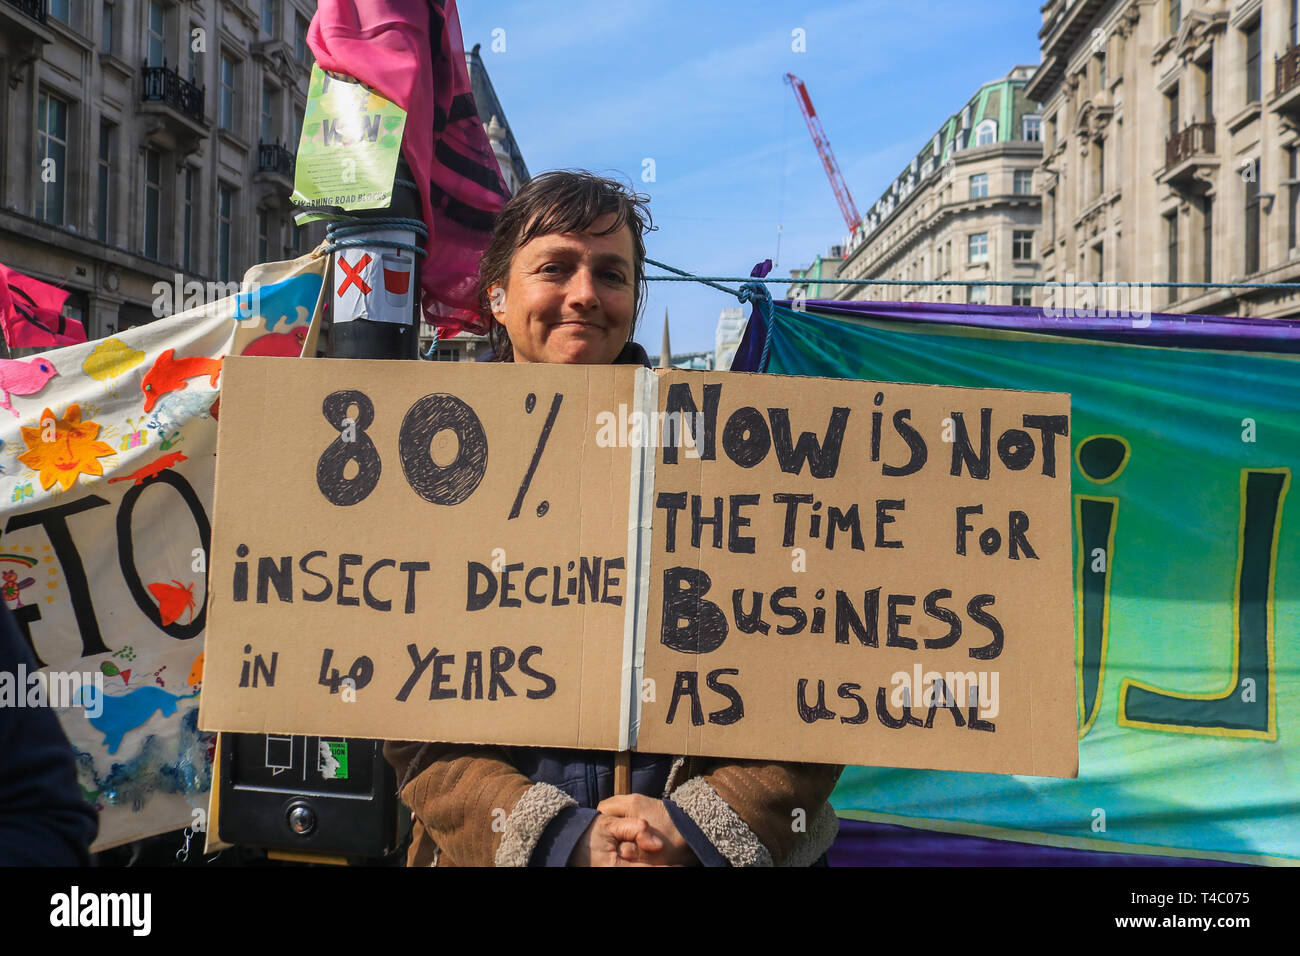 London, UK. 15th Apr, 2019. Hundreds of Environment activists from Extinction Rebellion take part in a sit in protest in Oxford Circus and across parts of central London to highlight the threat of global warming on the planet and ecosystem and to urge the government to take action Credit: amer ghazzal/Alamy Live News Stock Photo